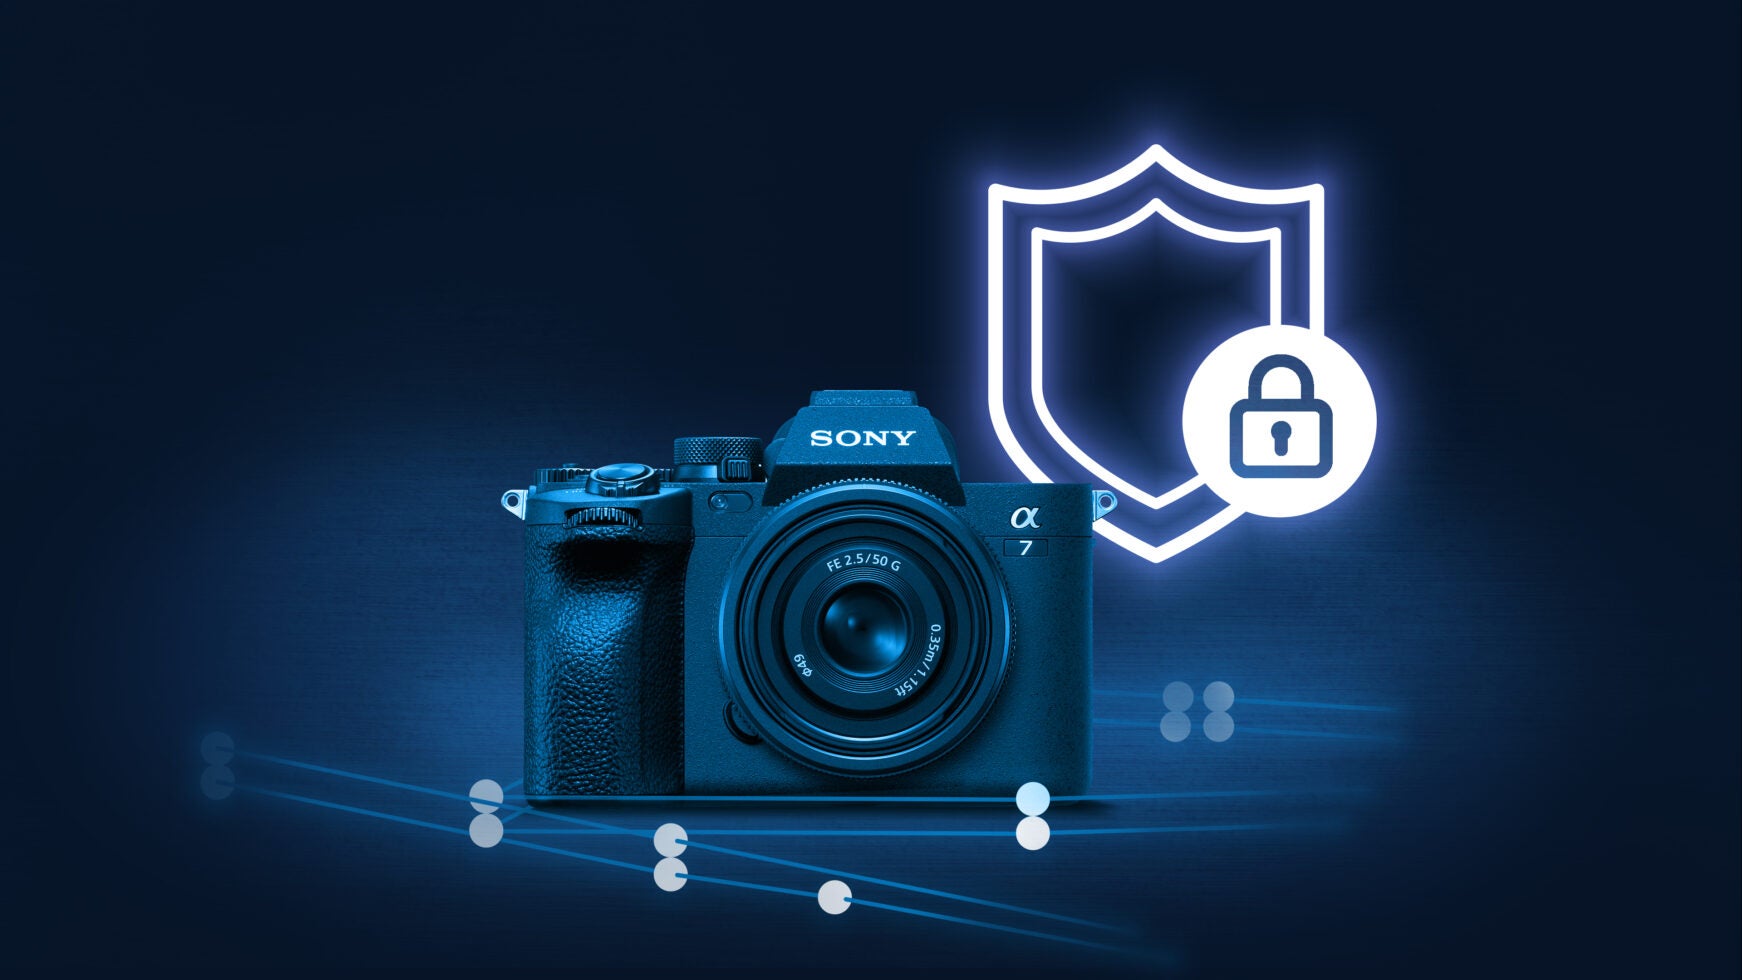 Sony camera HD wallpapers free download | Wallpaperbetter